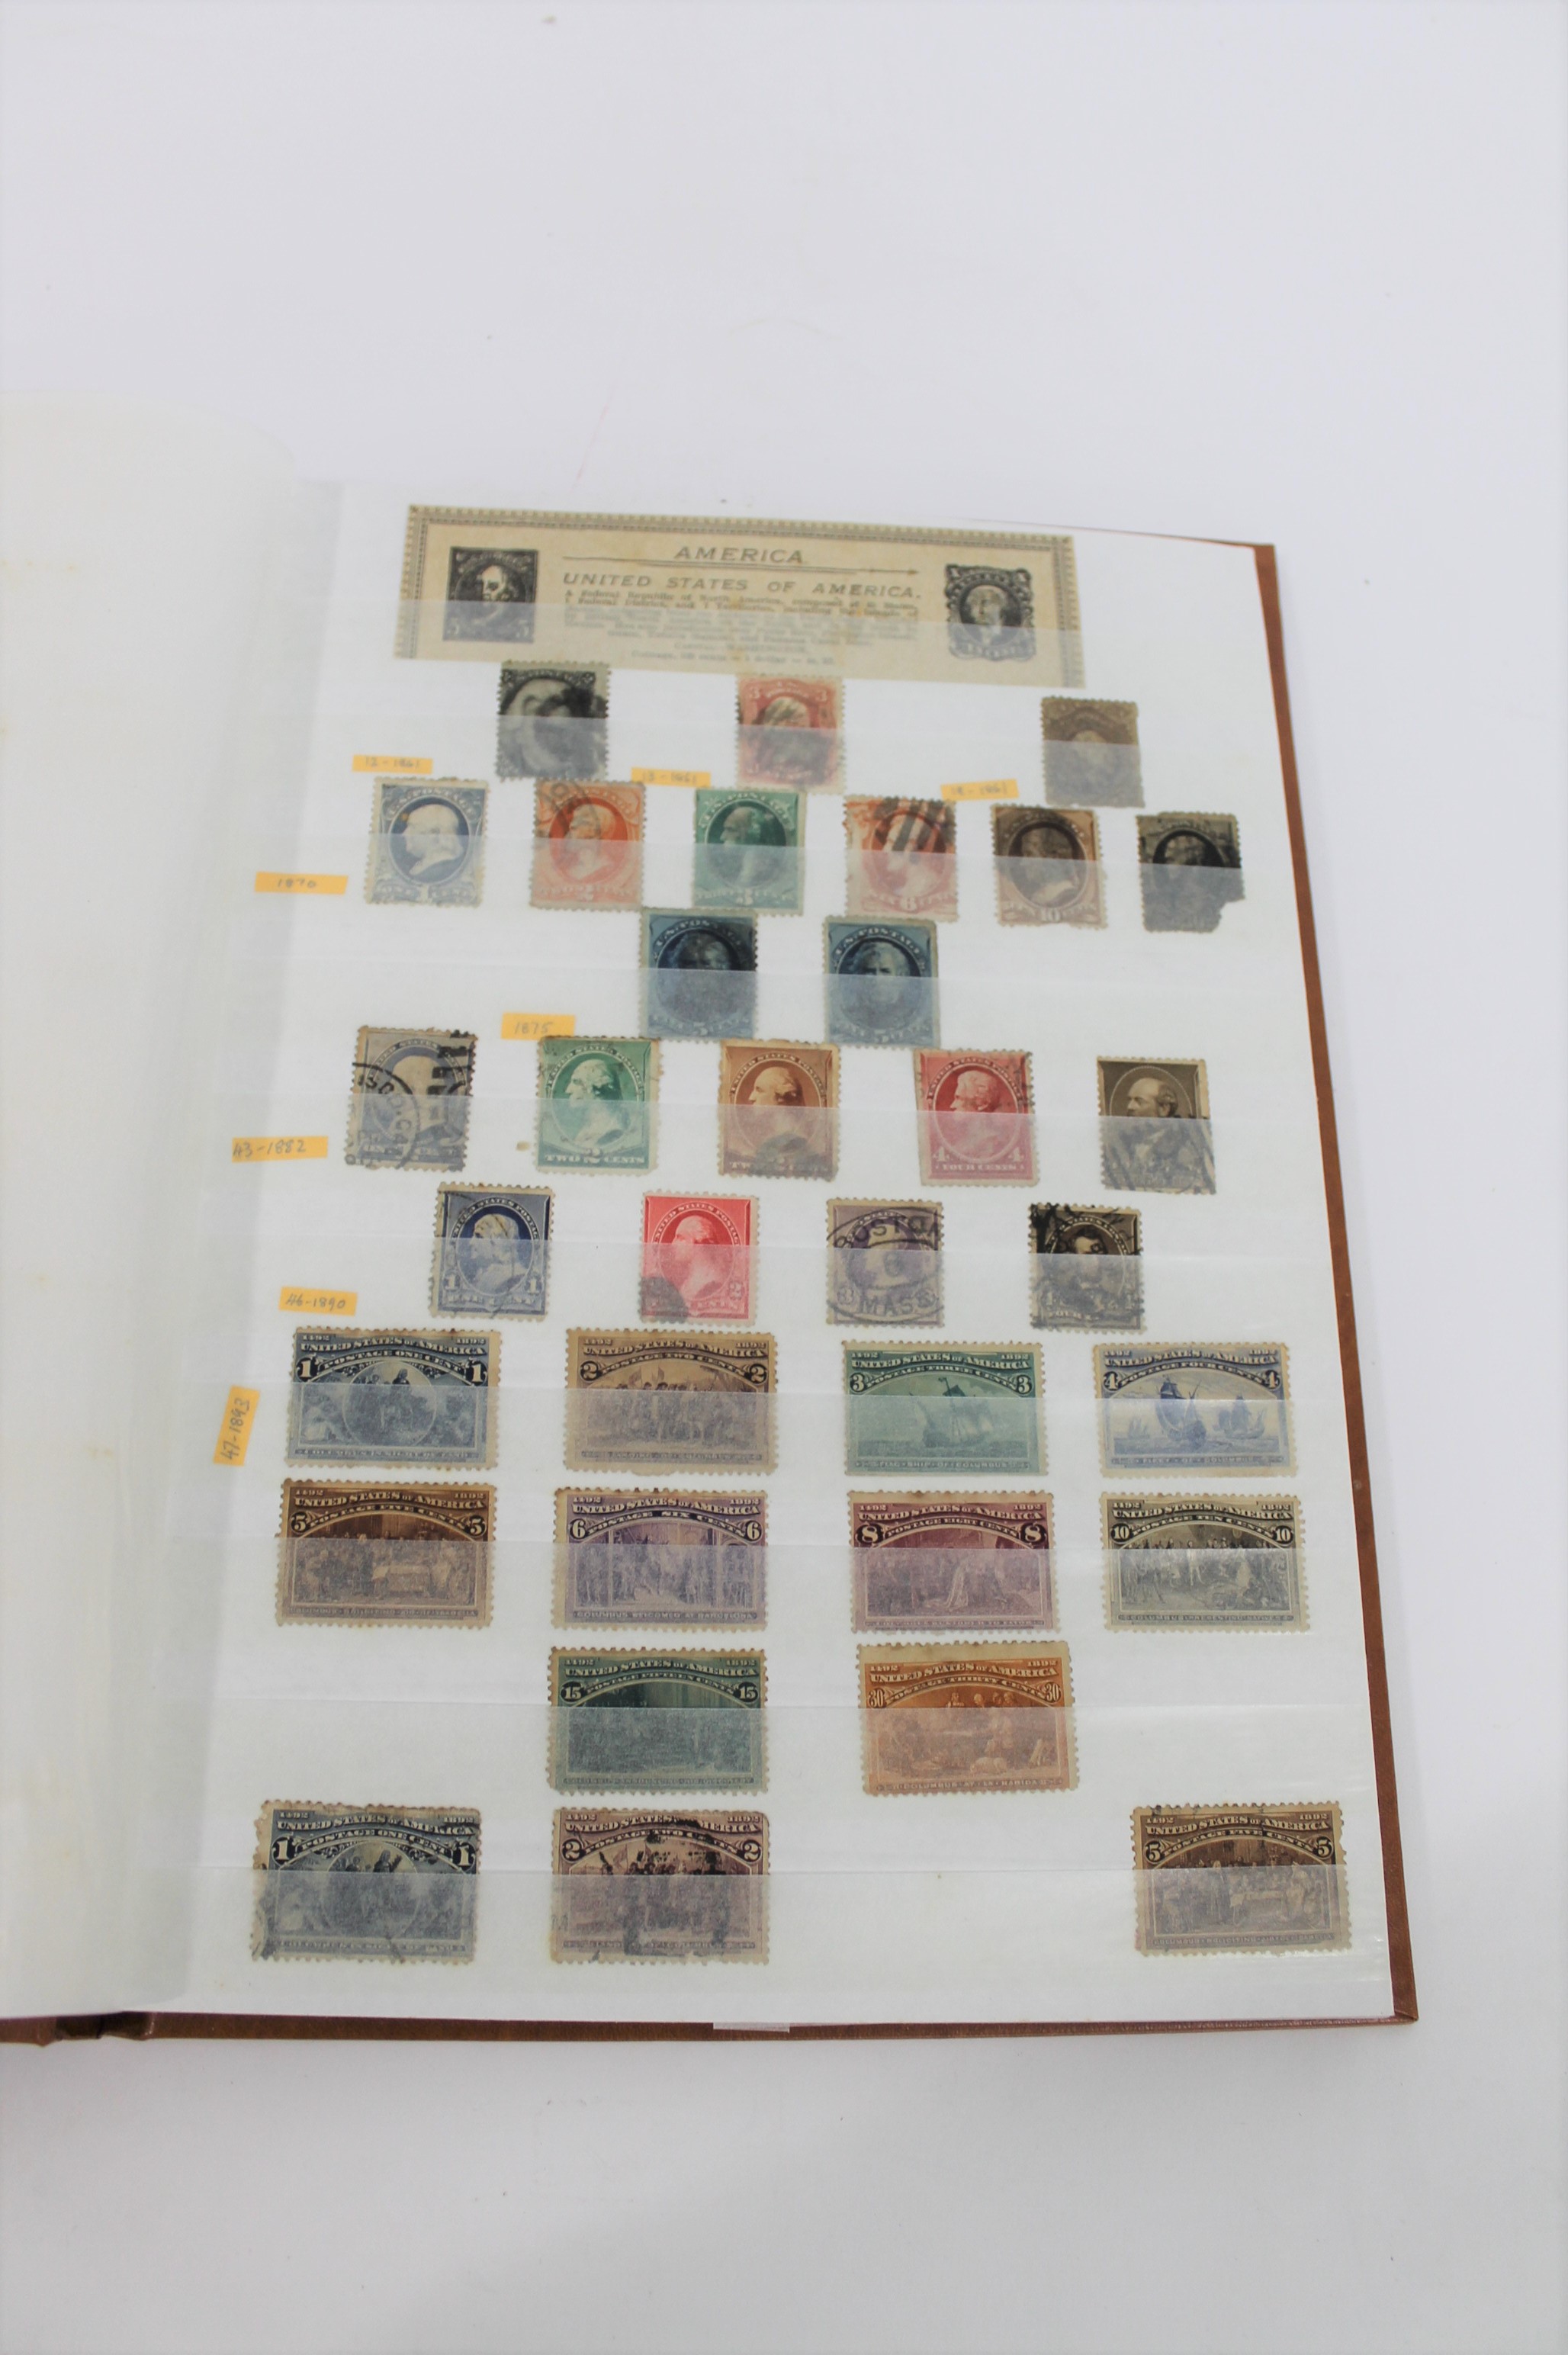 EUROPE & WORLD STAMPS 7 albums including 19th and 20thc used European stamps, Denmark, Finland, - Image 2 of 17